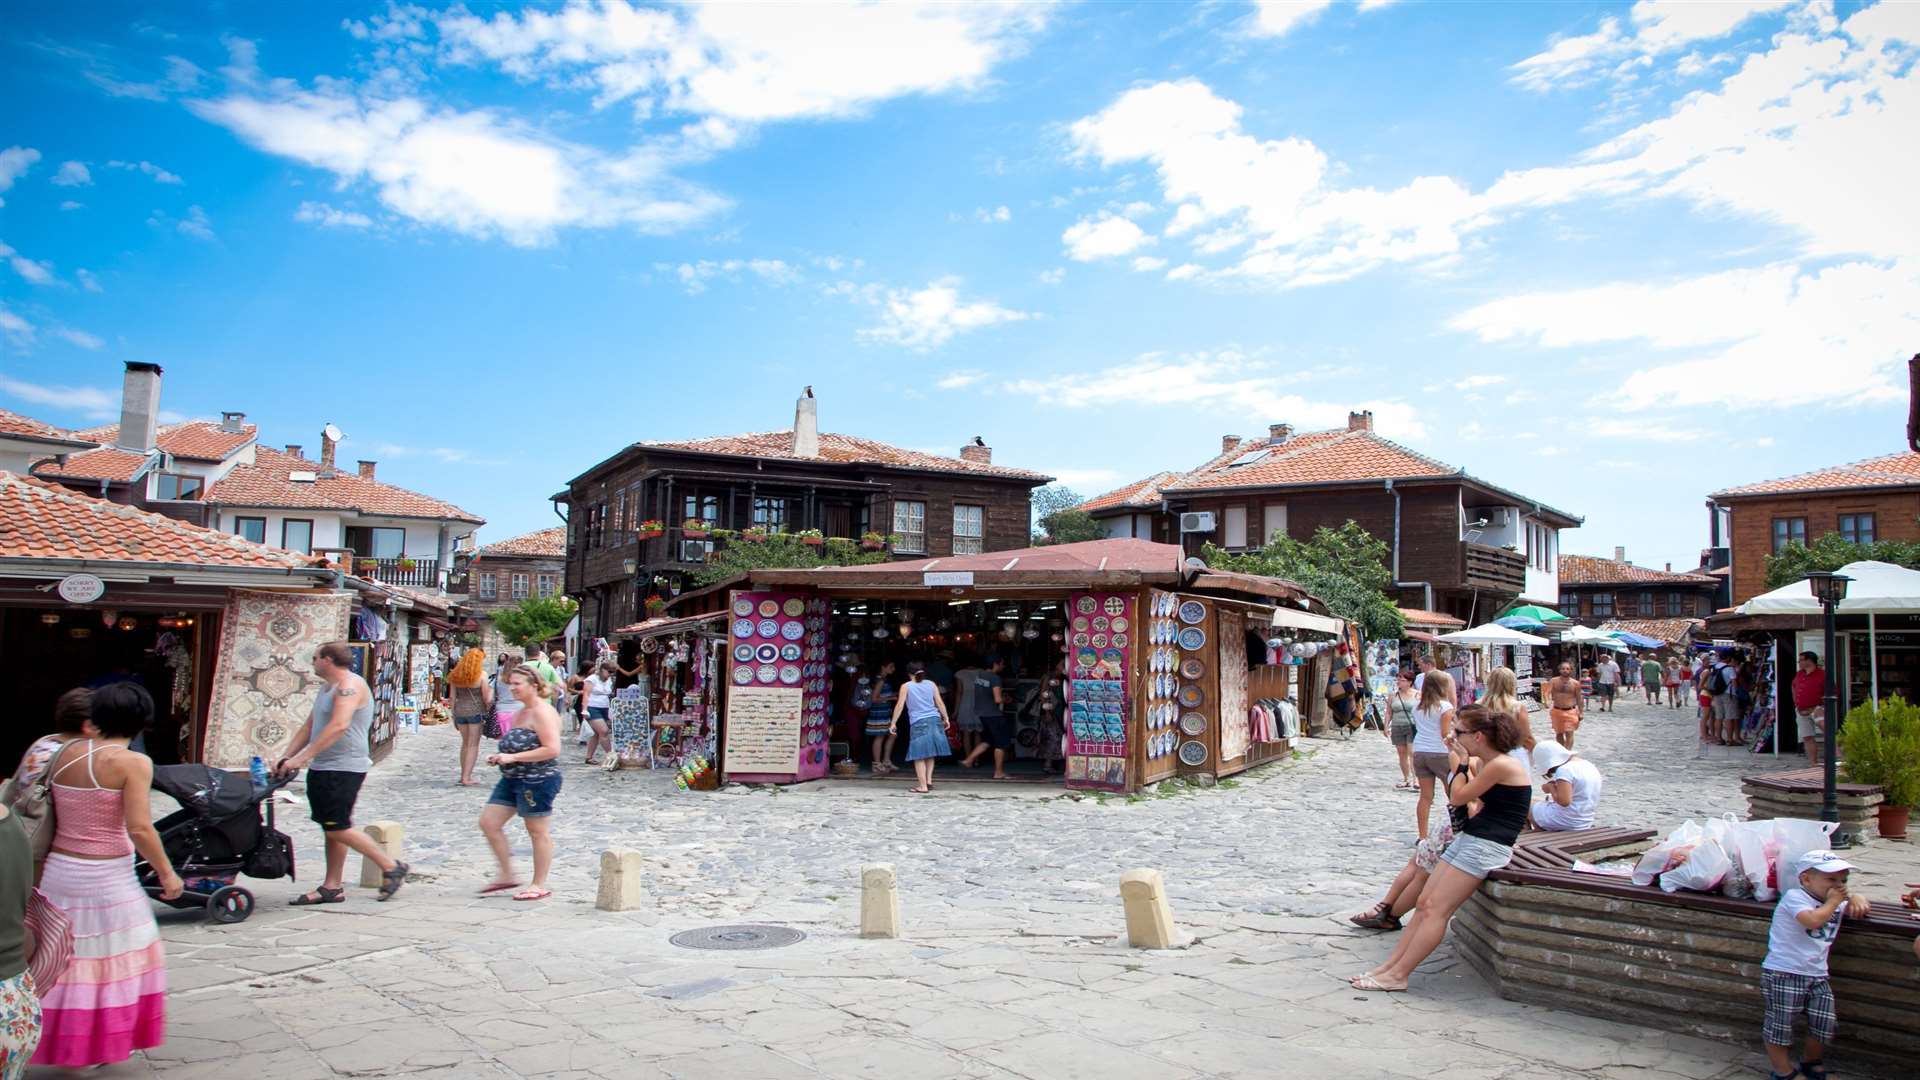 Nessebar Old Town, a short bus ride from Sunny Beach